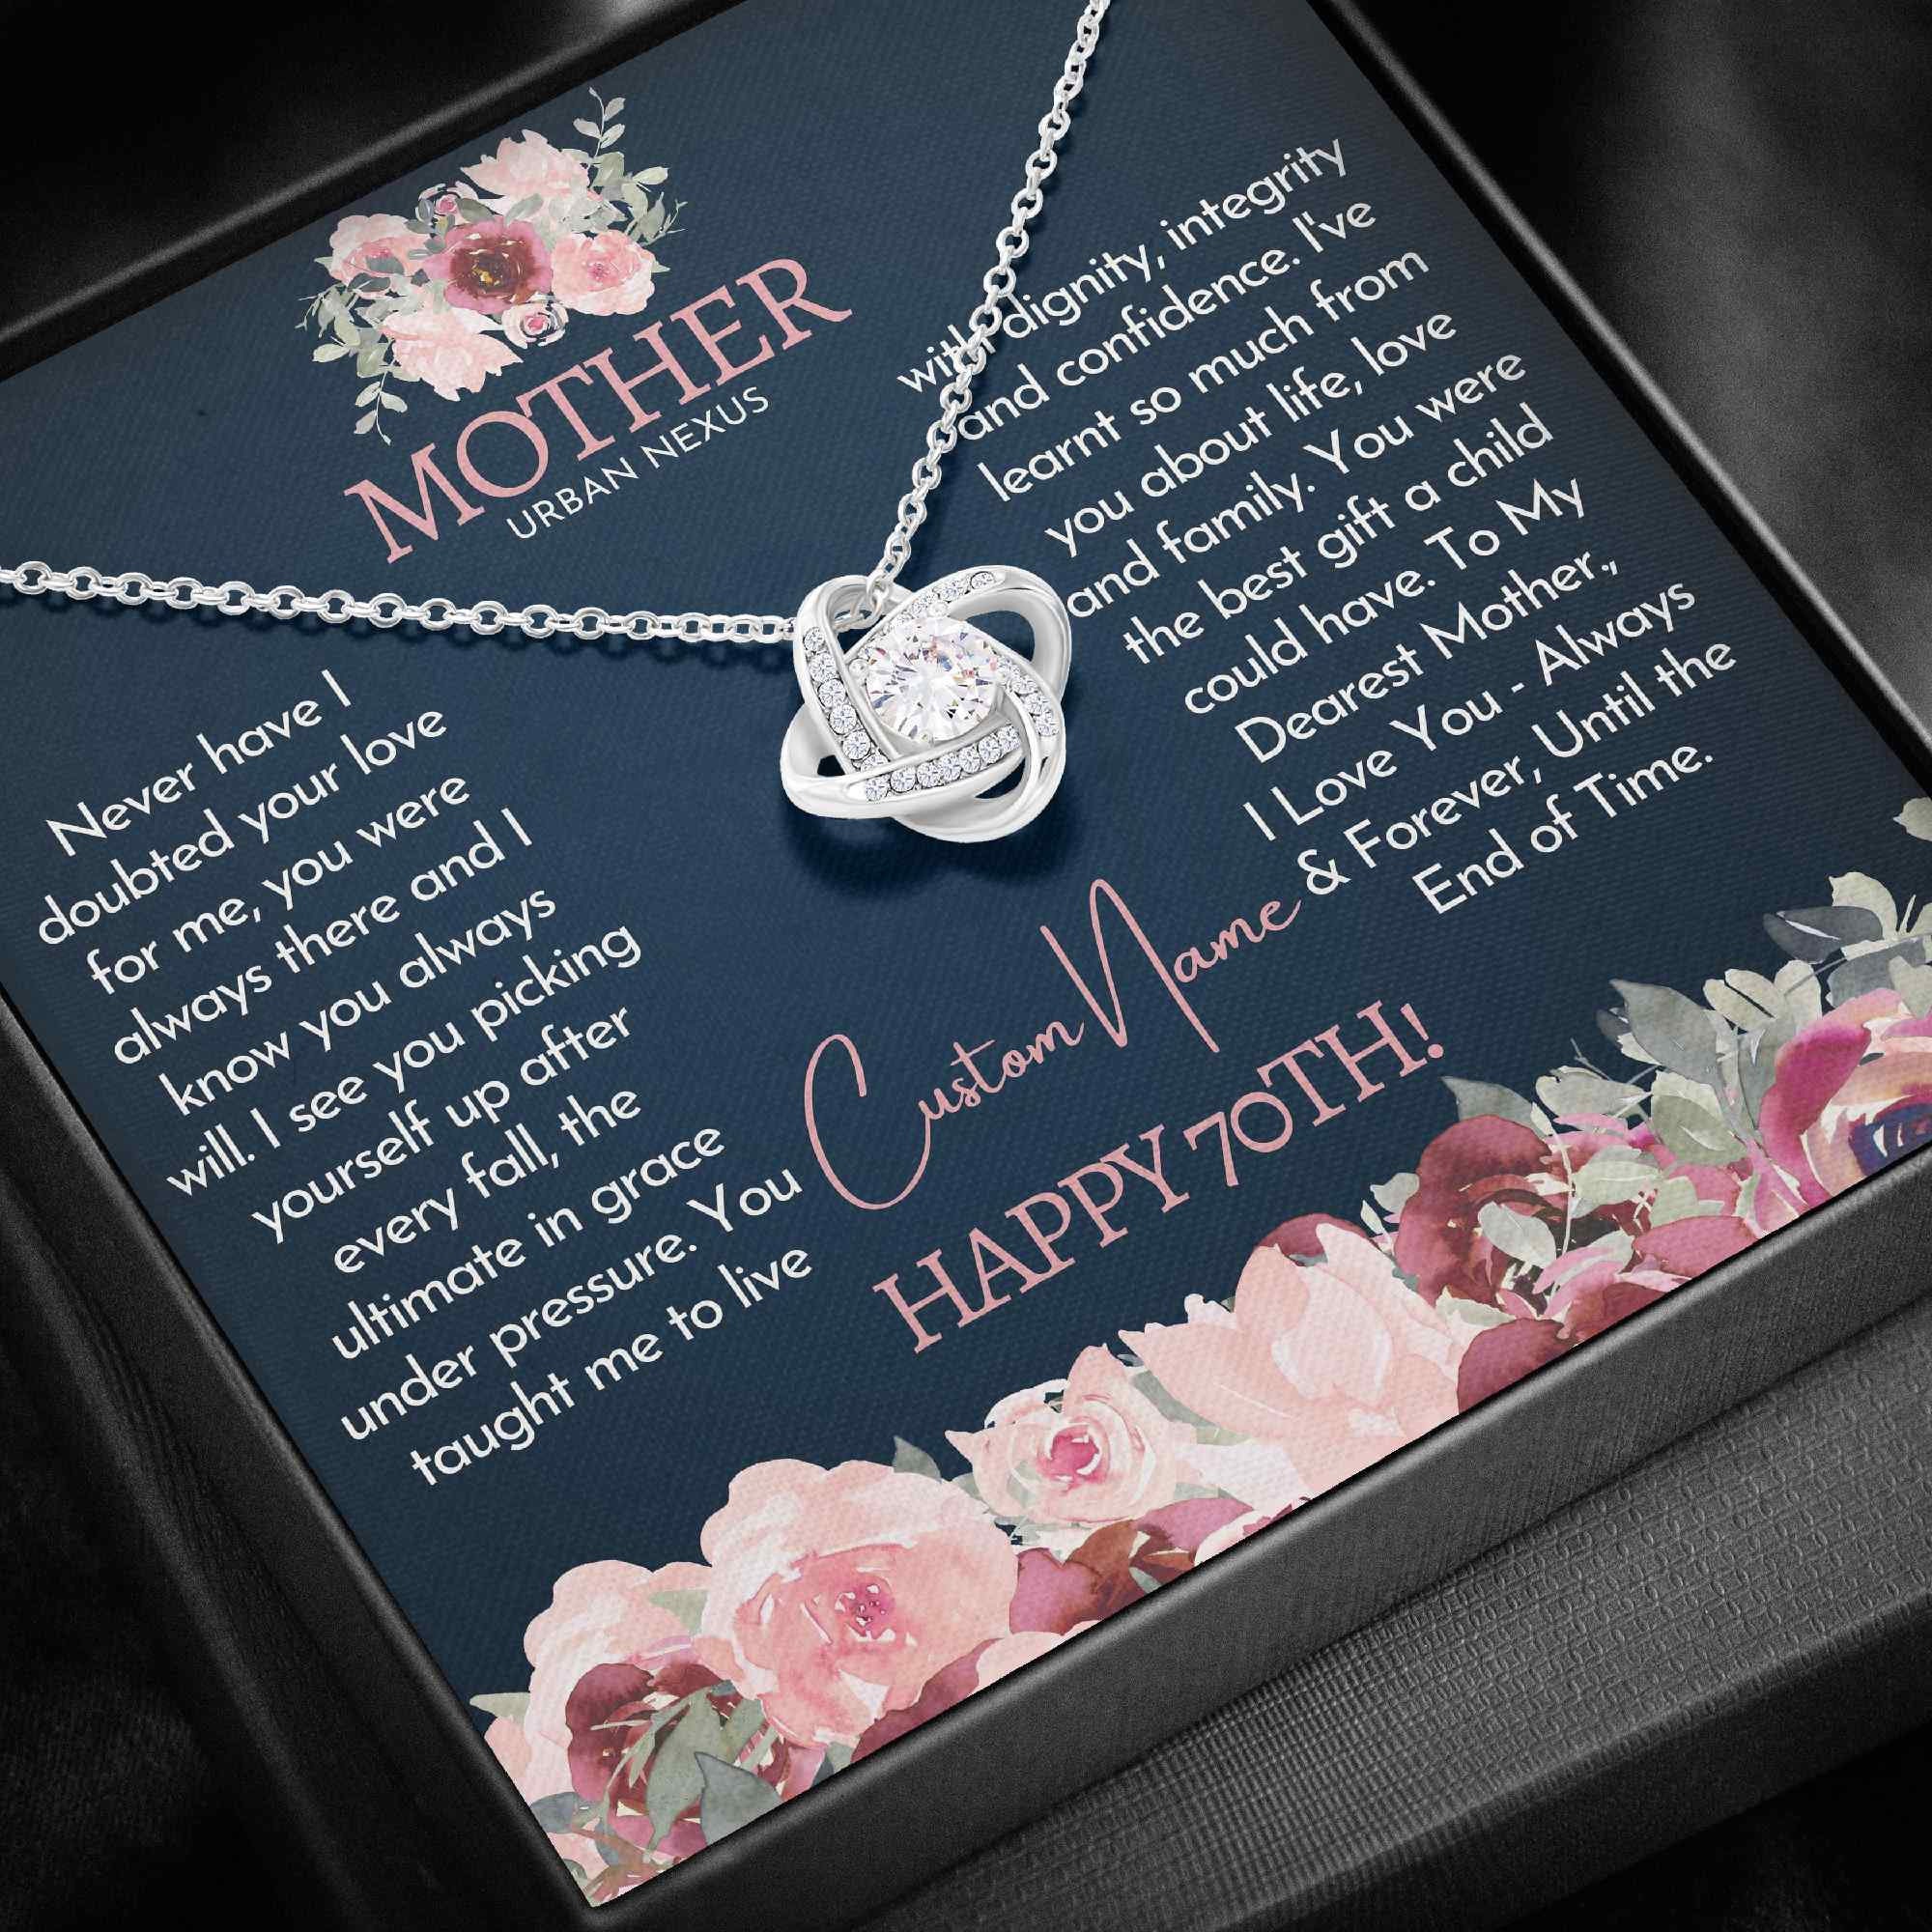 70+ Gifts for Mom in 2023 - Gift Ideas for Mom